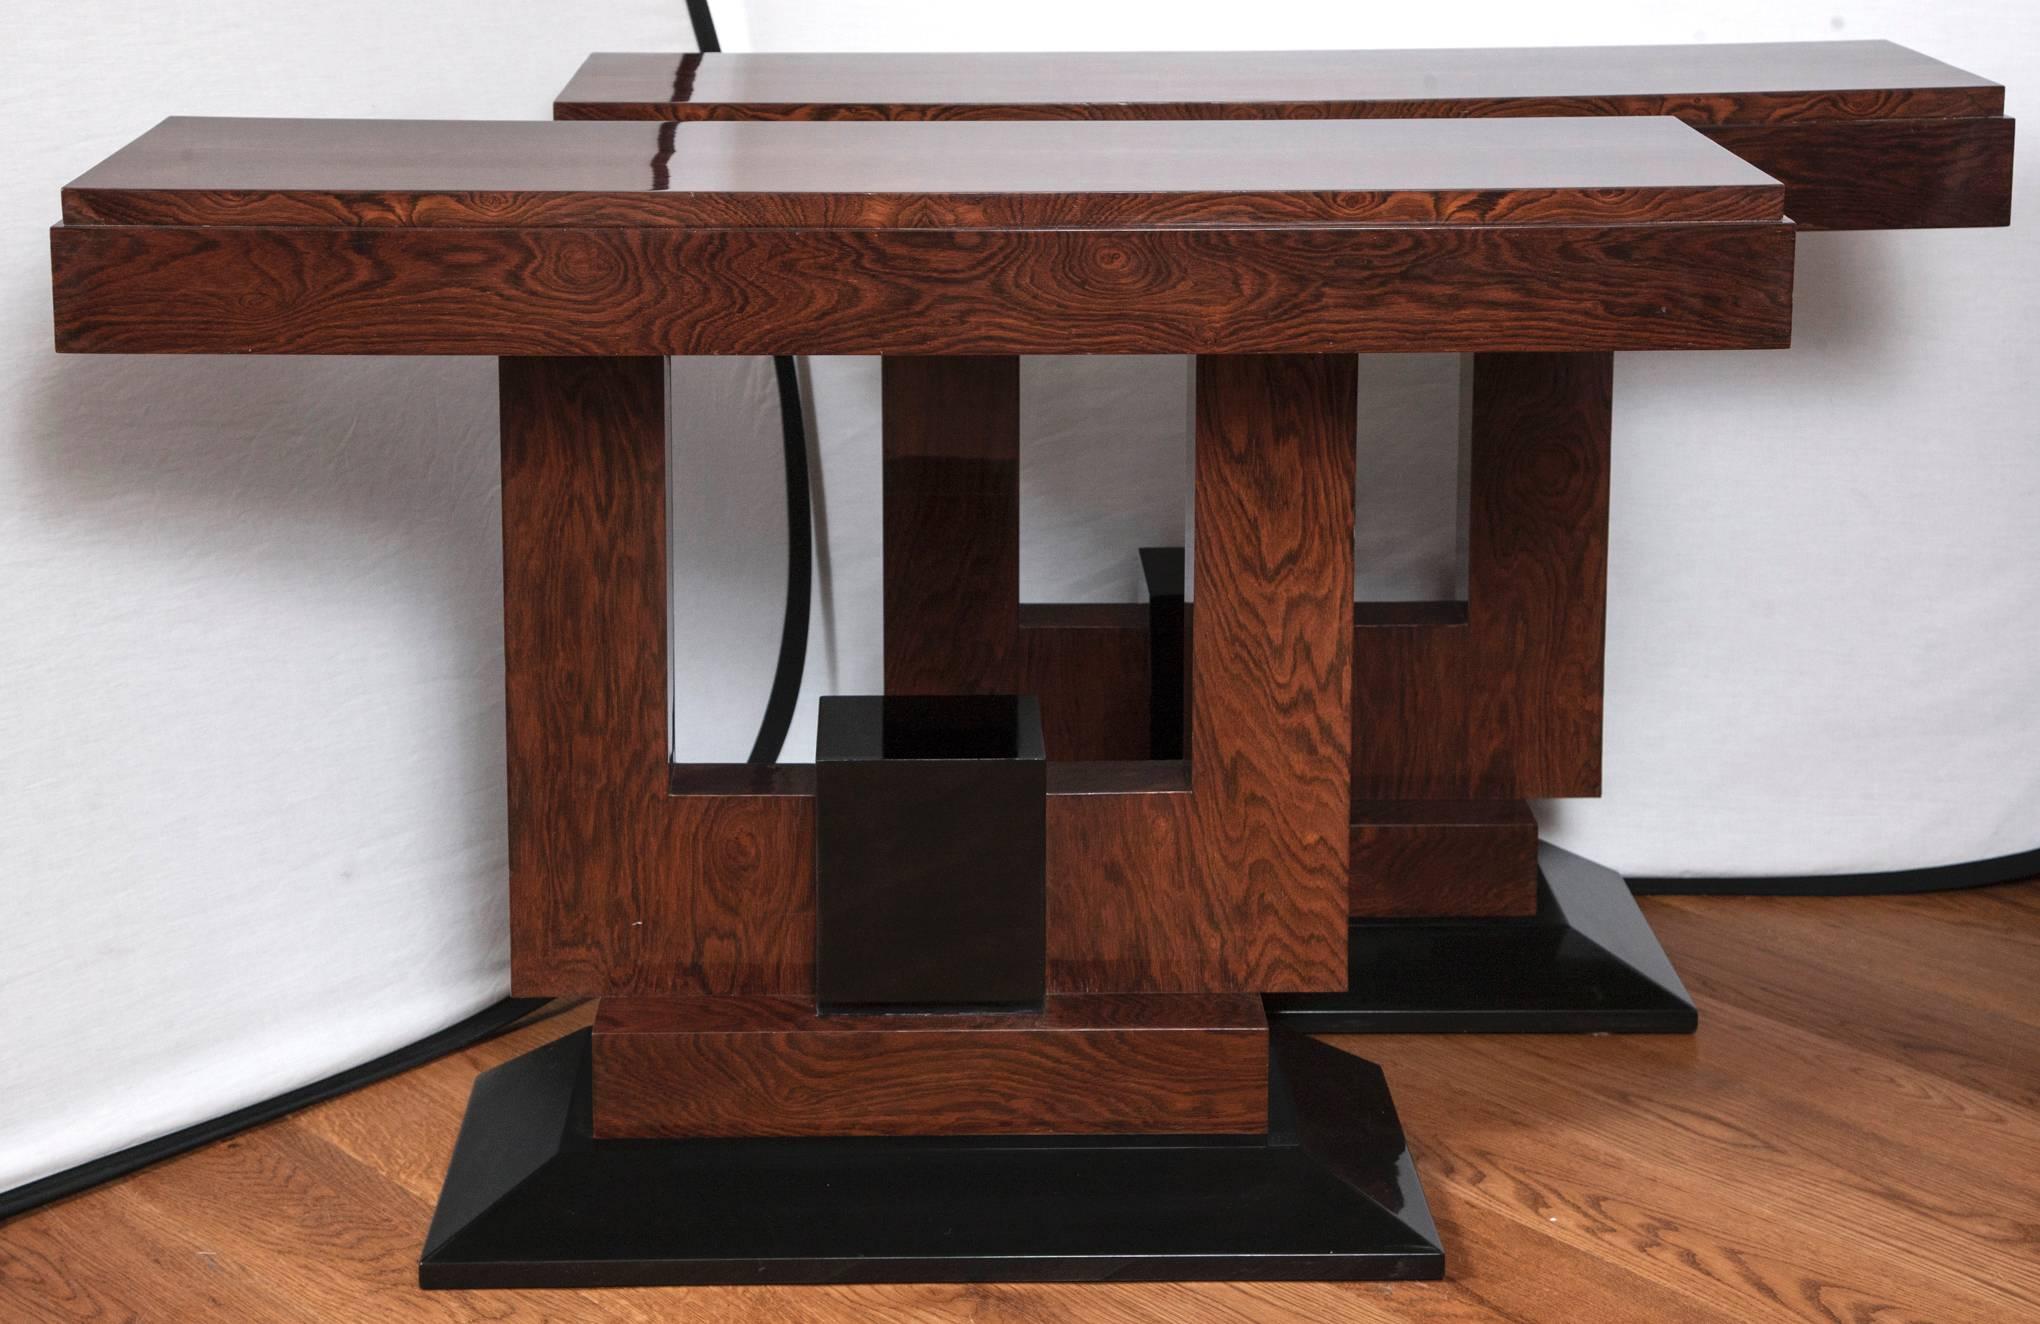 Handsome pair of narrow rectangular stepped platform tables with cubical u-shaped bases in macassar ebony veneer and ebonized detailing, unusual form, dating 1930-1940ca, refurbished and recently French polished
